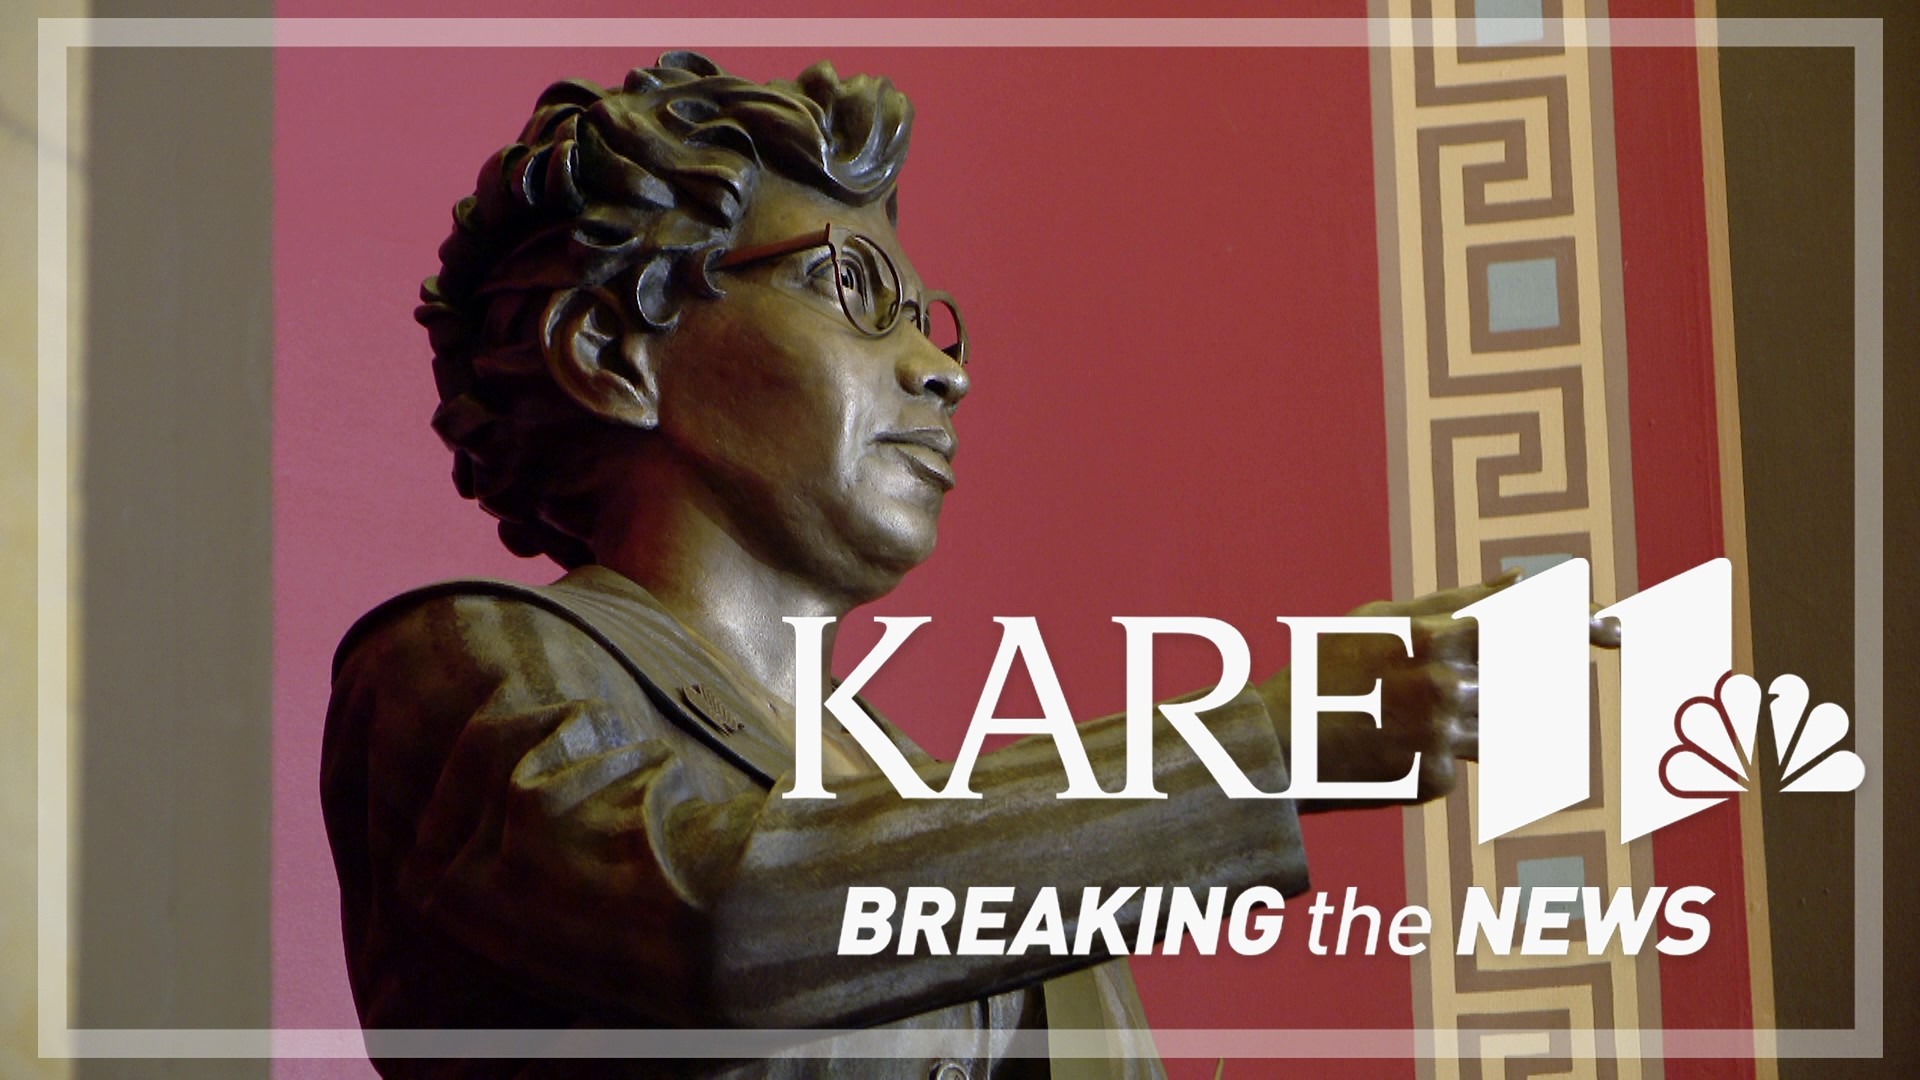 It's the first statue of a Black woman at the Capitol, and first full-body sculpture of any person of color there.